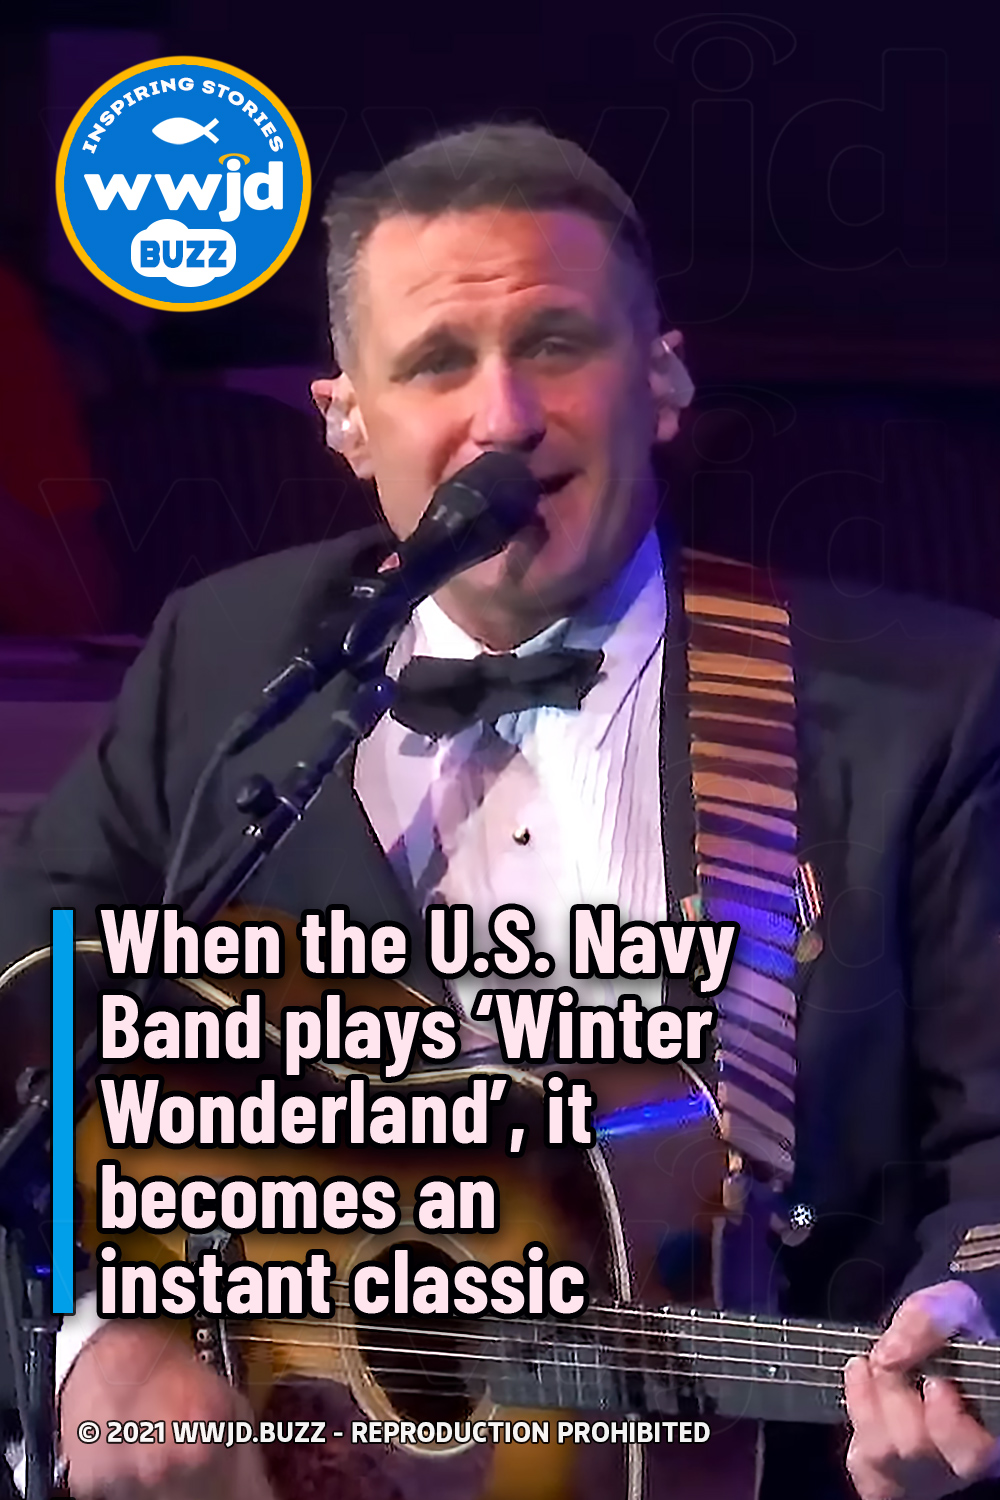 When the U.S. Navy Band plays ‘Winter Wonderland’, it becomes an instant classic